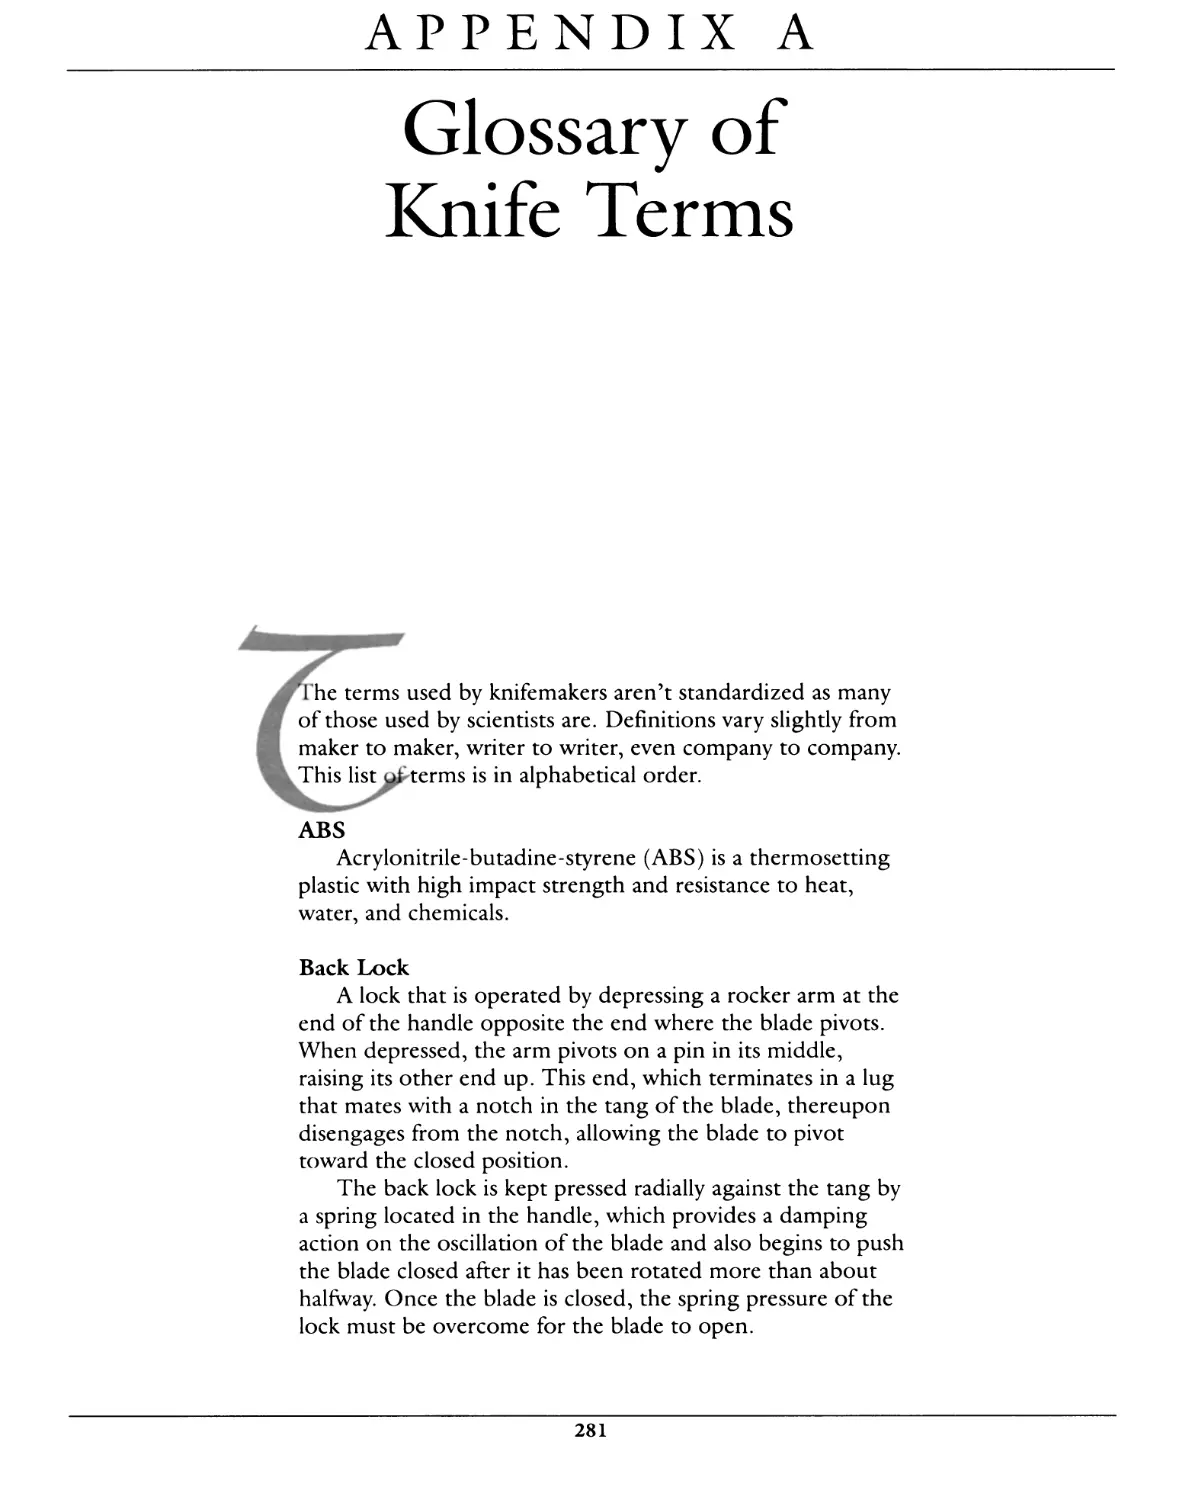 APPENDIX A: GLOSSARY OF KNIFE TERMS